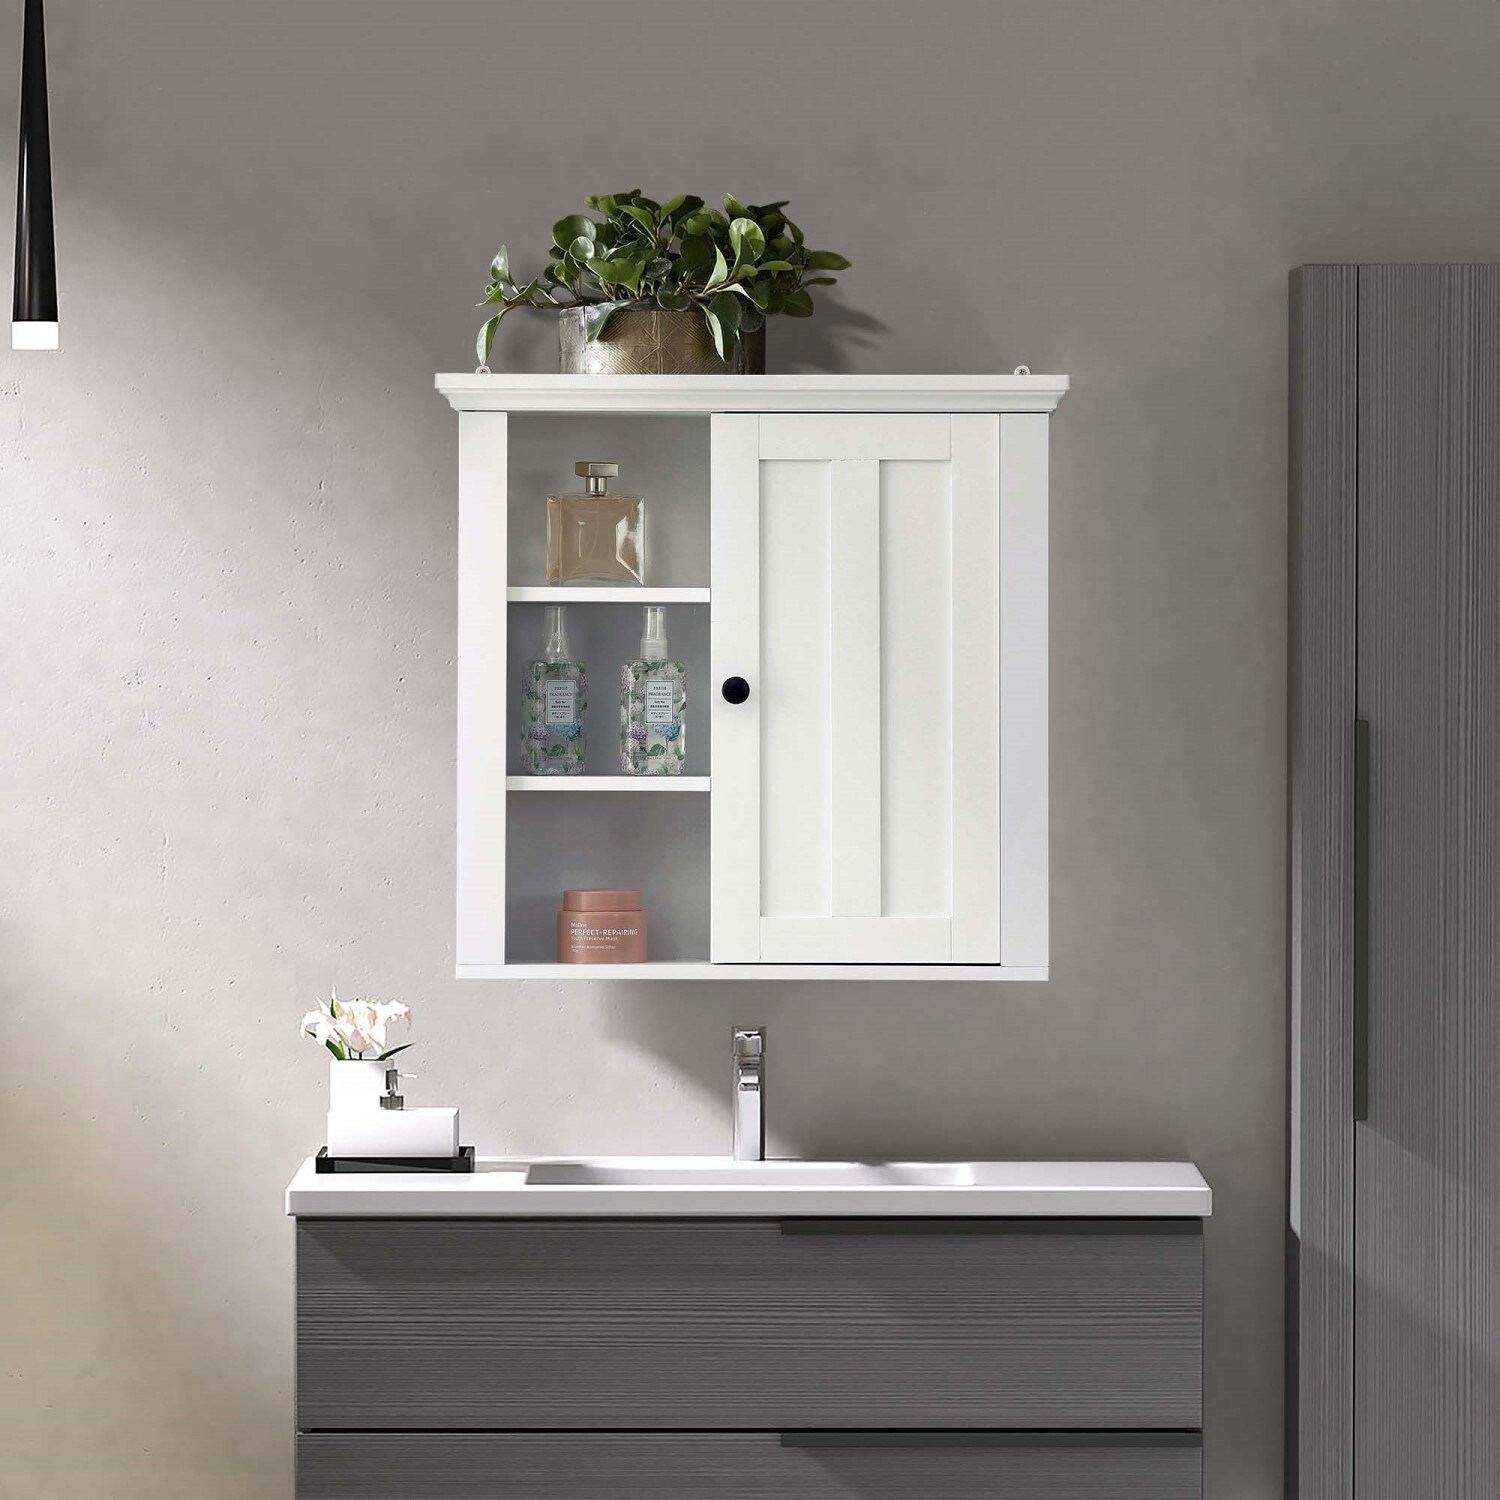 https://ak1.ostkcdn.com/images/products/is/images/direct/c308ff4abddd1acee1bfc73ed122212e7b1d44d1/White-MDF-Wood-Bathroom-1-Door-Wall-Storage-Cabinet.jpg